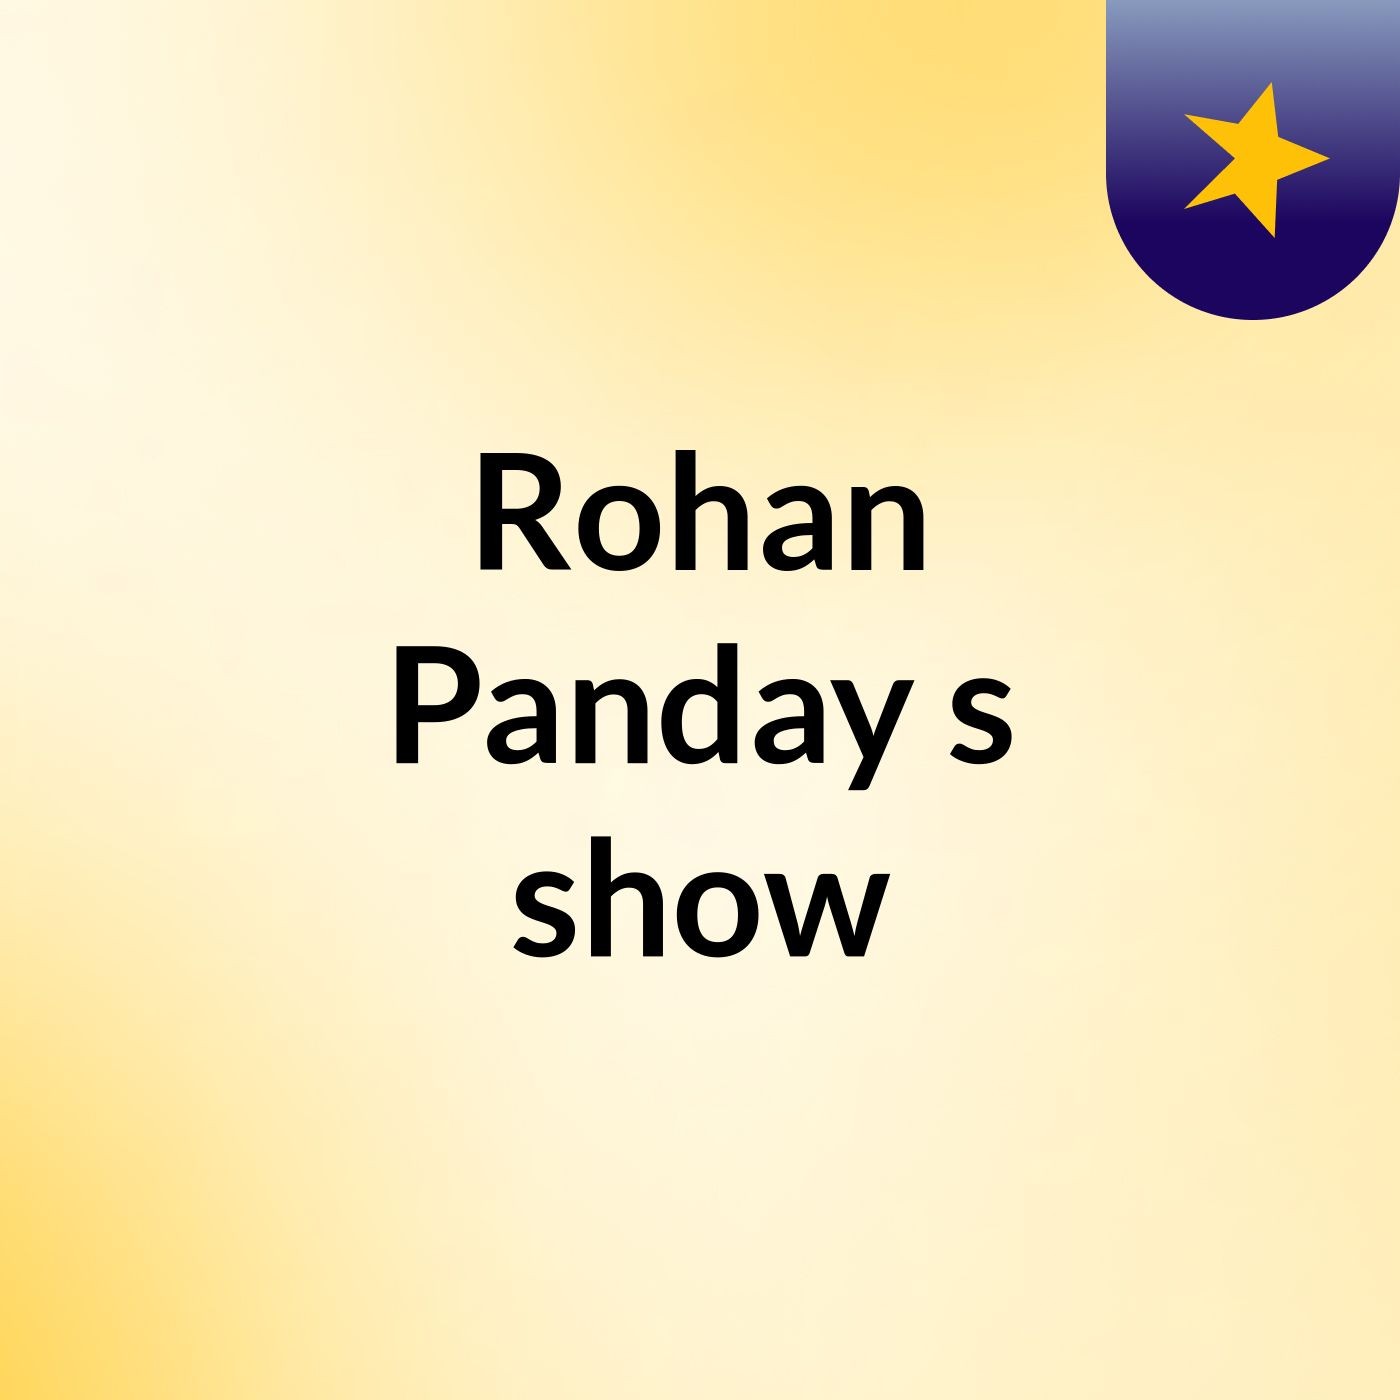 Rohan Panday's show